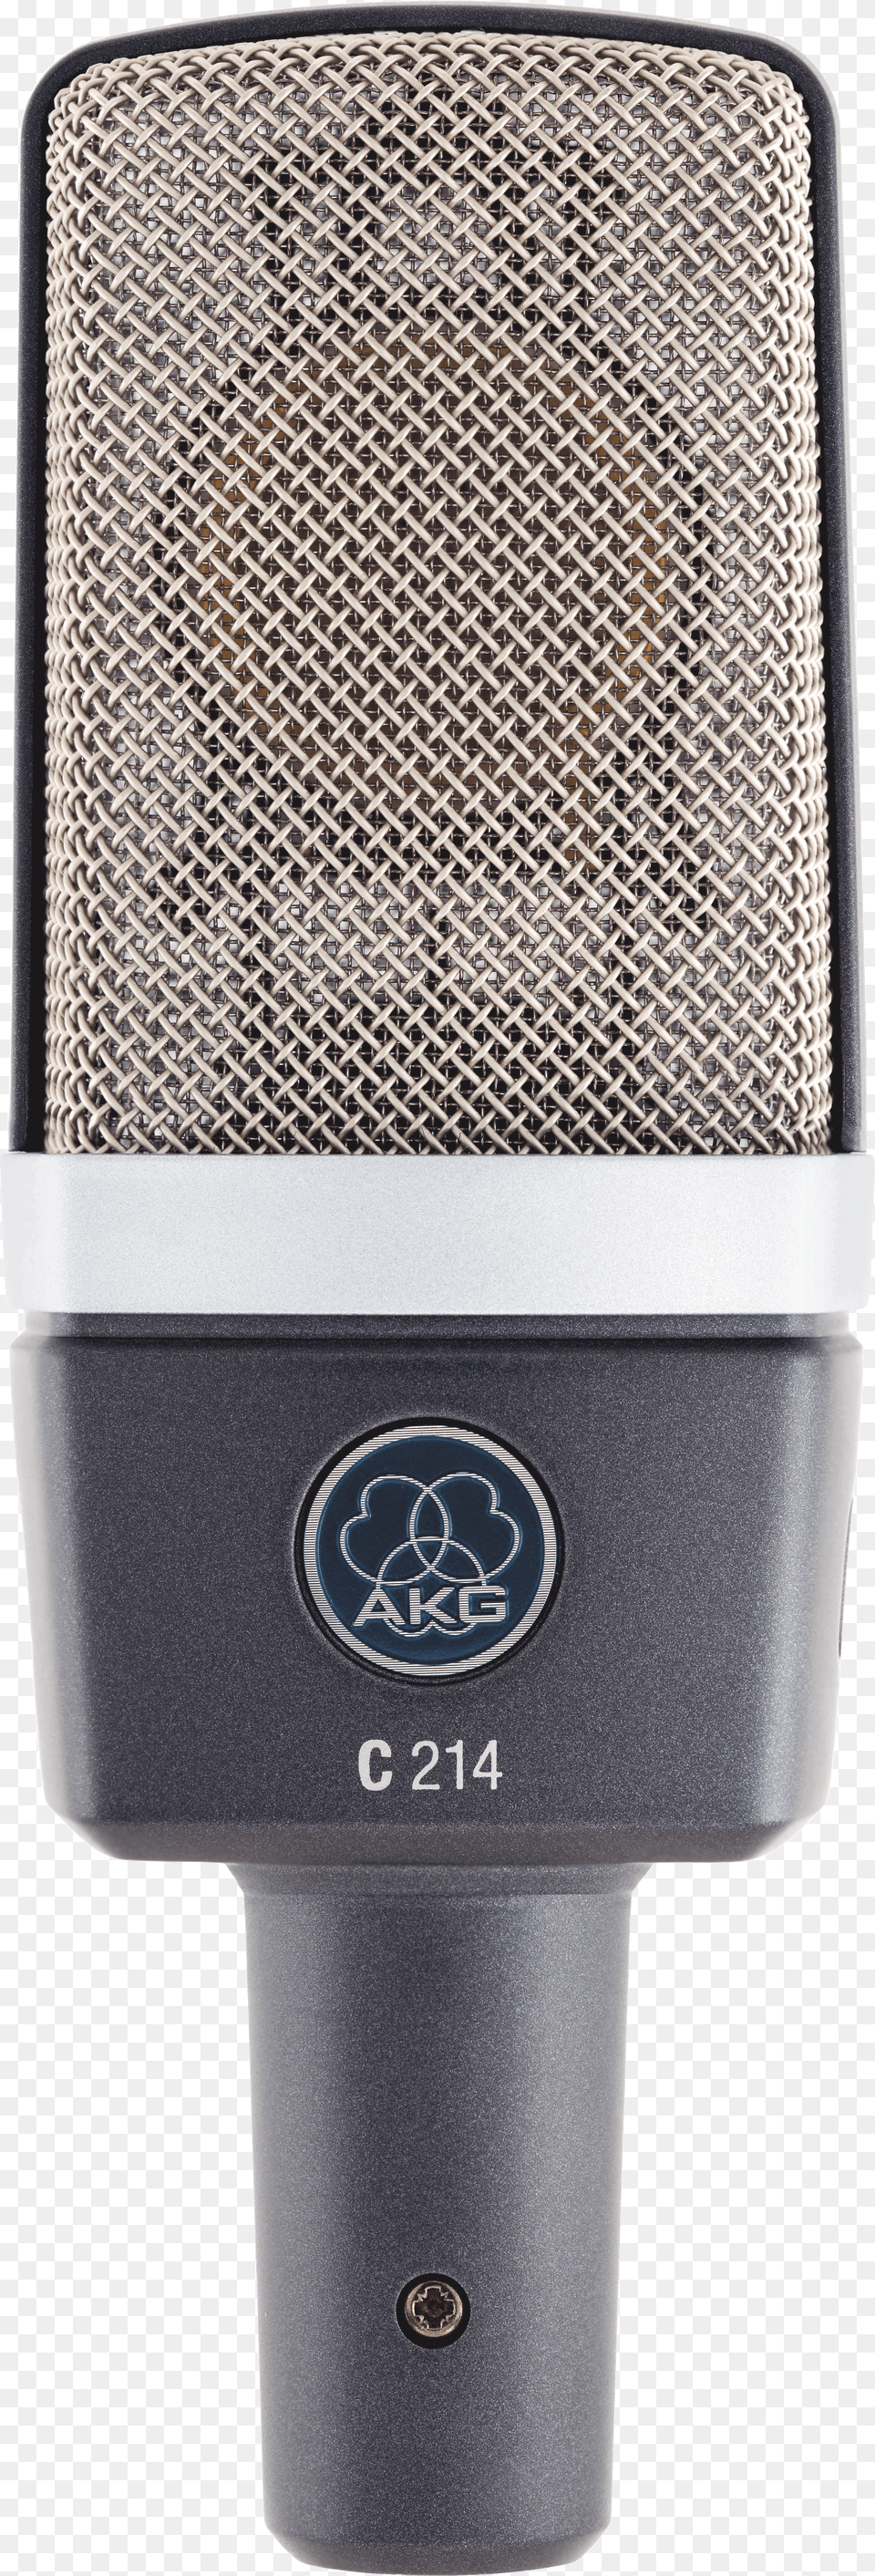 Akg C214 Condenser Microphone Condenser Microphone Transparent Background Free Png Download